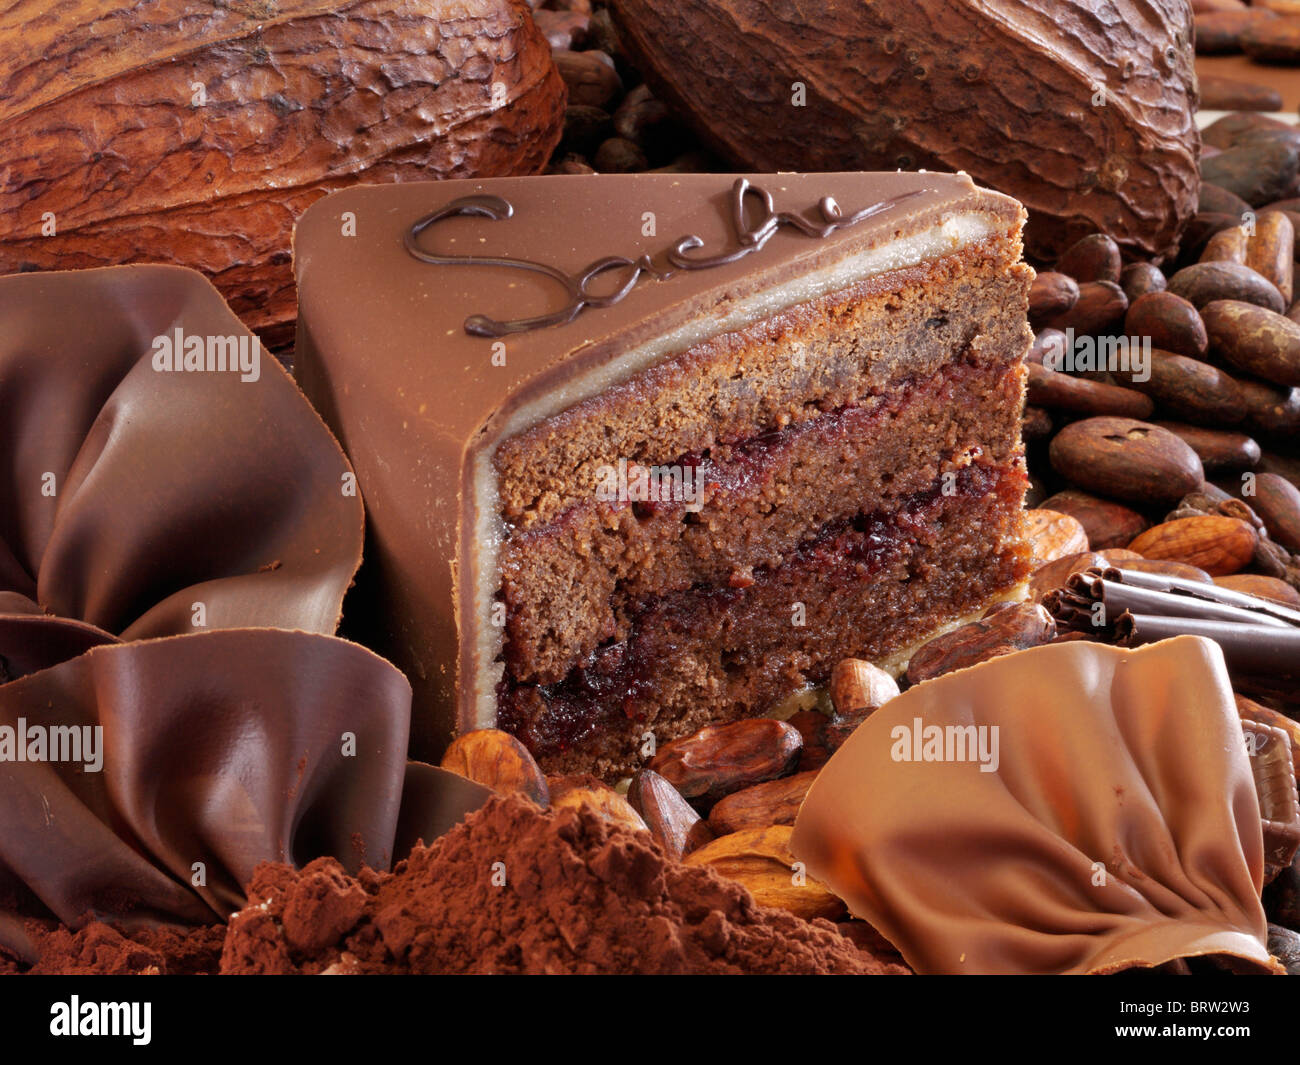 Slice of Sacher cake with chocolate fan, cocoa pods and cocoa beans Stock Photo